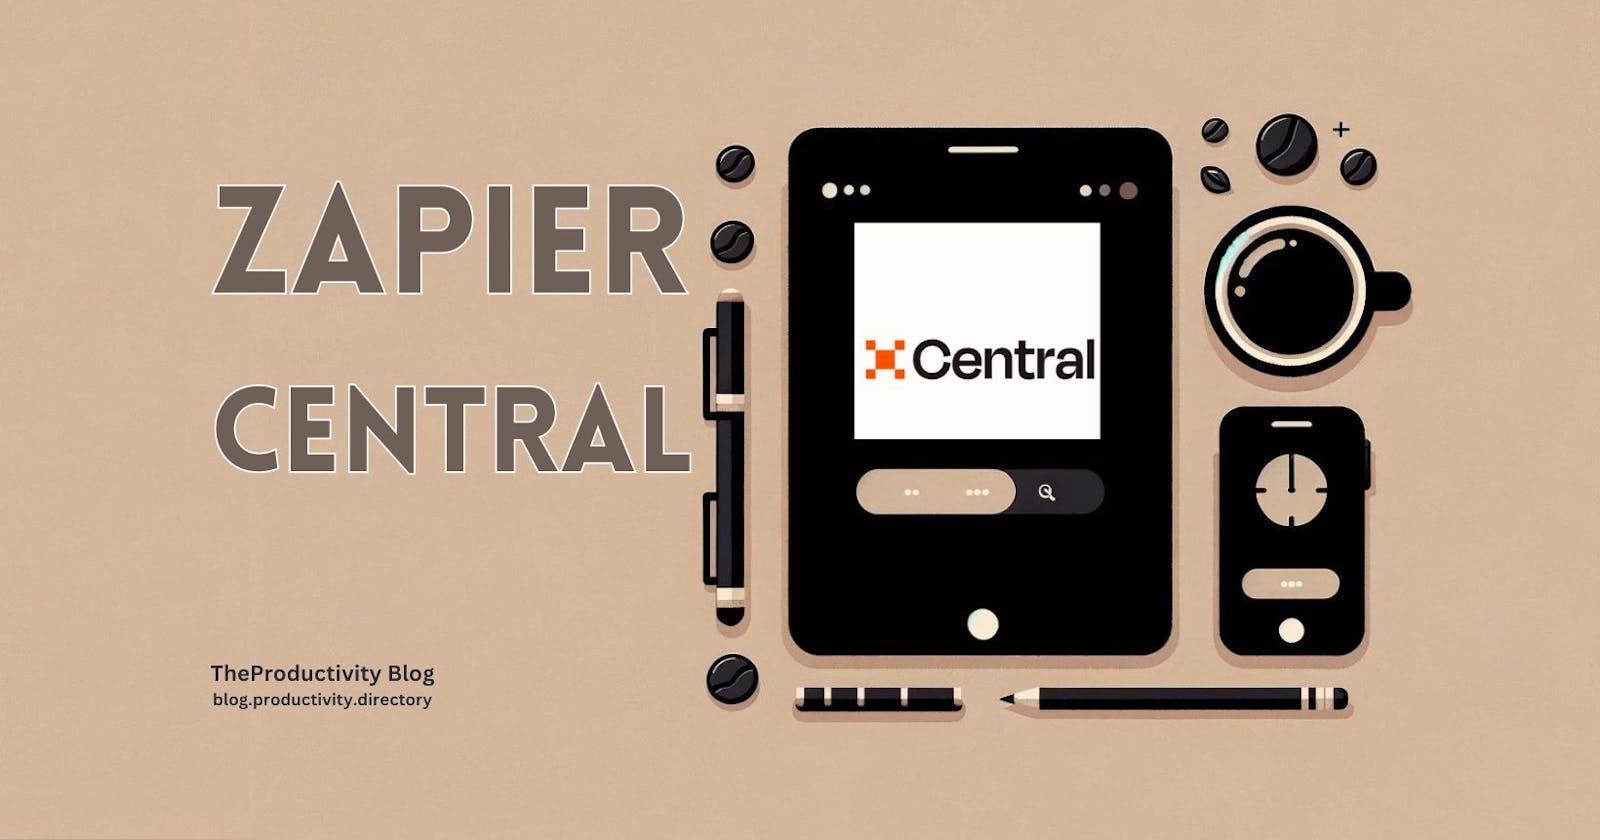 Introducing Zapier Central: Work Hand in Hand with AI Bots